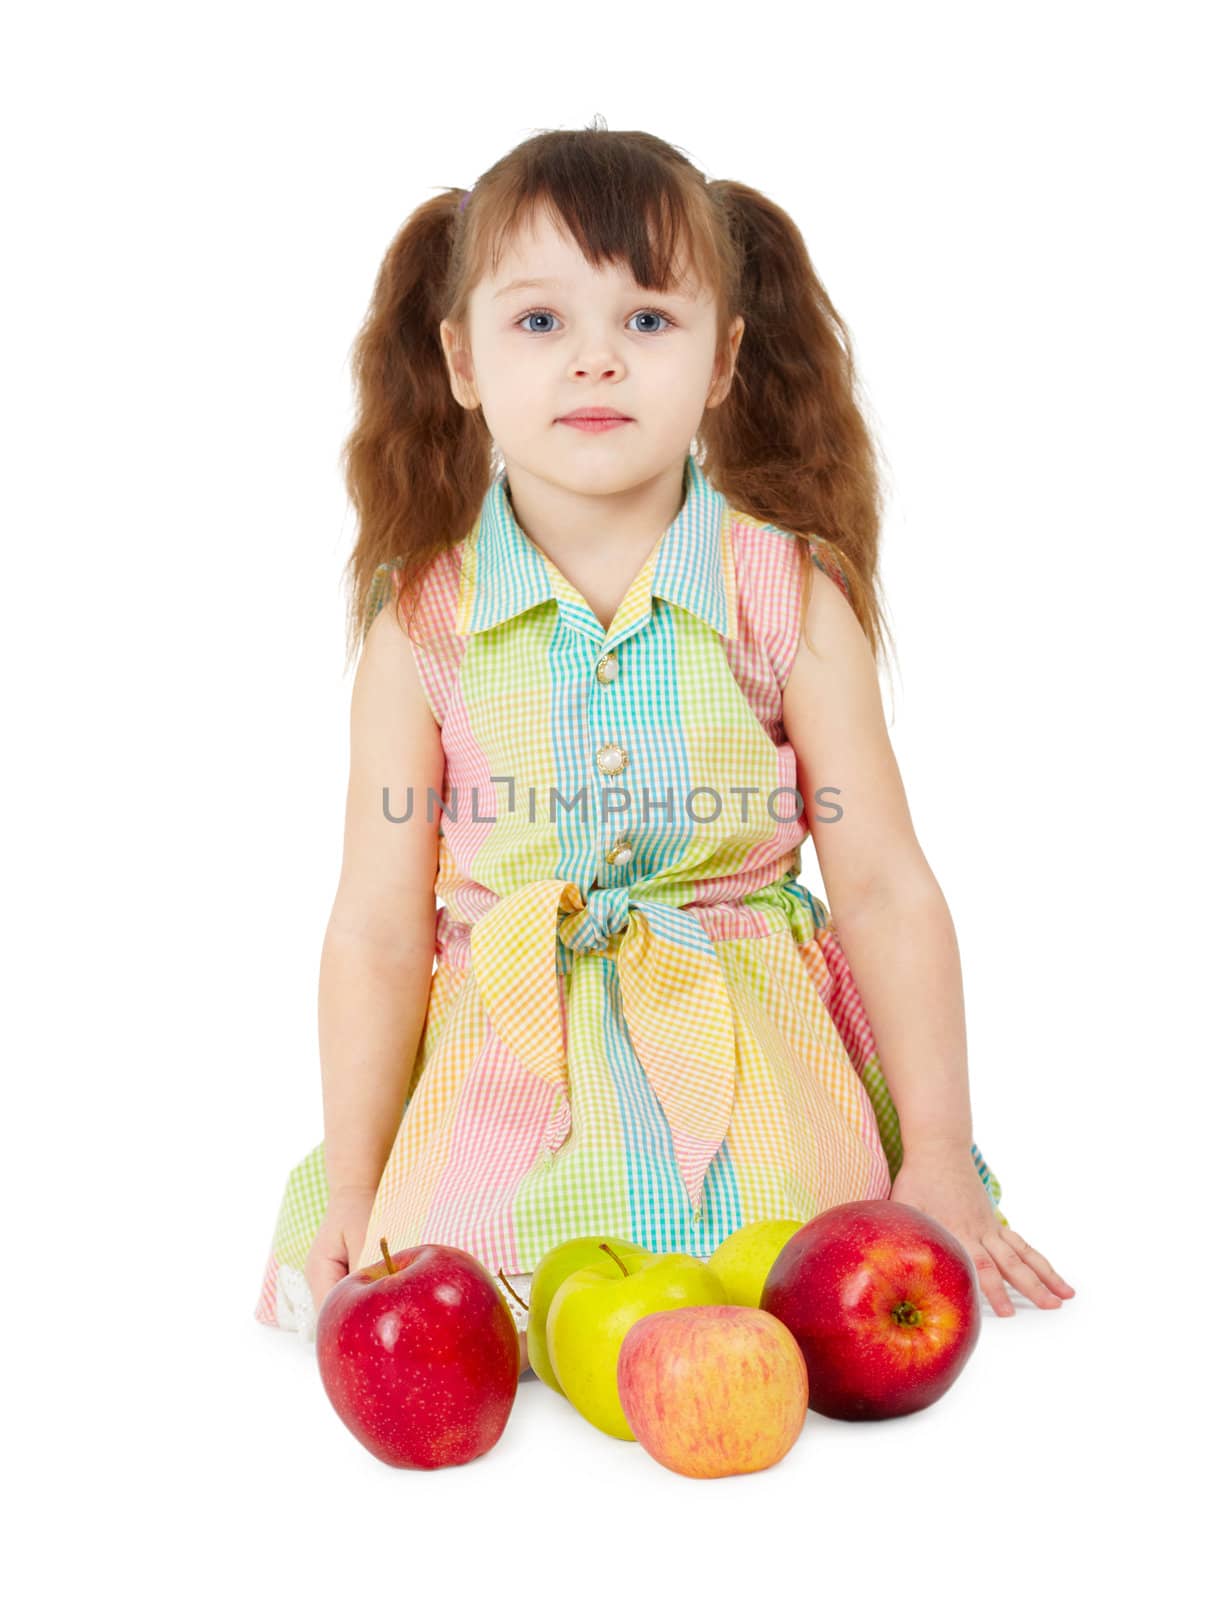 A little girl with the apples sits isolated on a white background